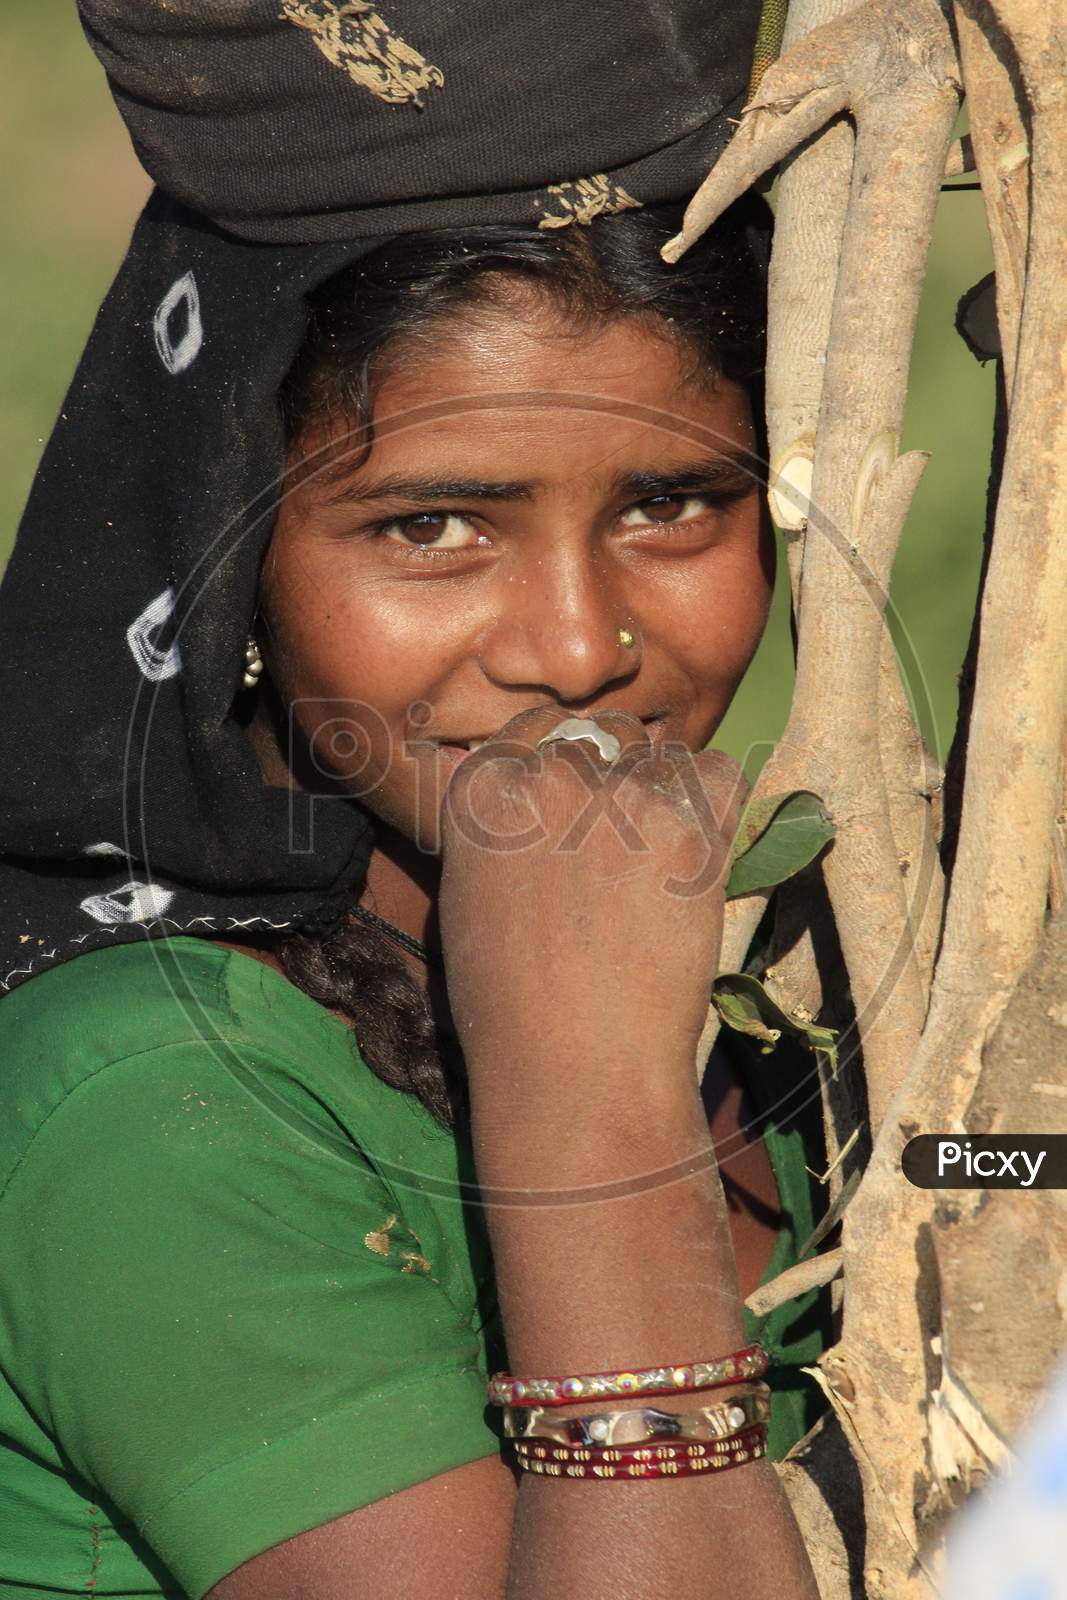 Indian Tribal Woman Carrying Cooking Wood From Forests In Tribal Villages Of India